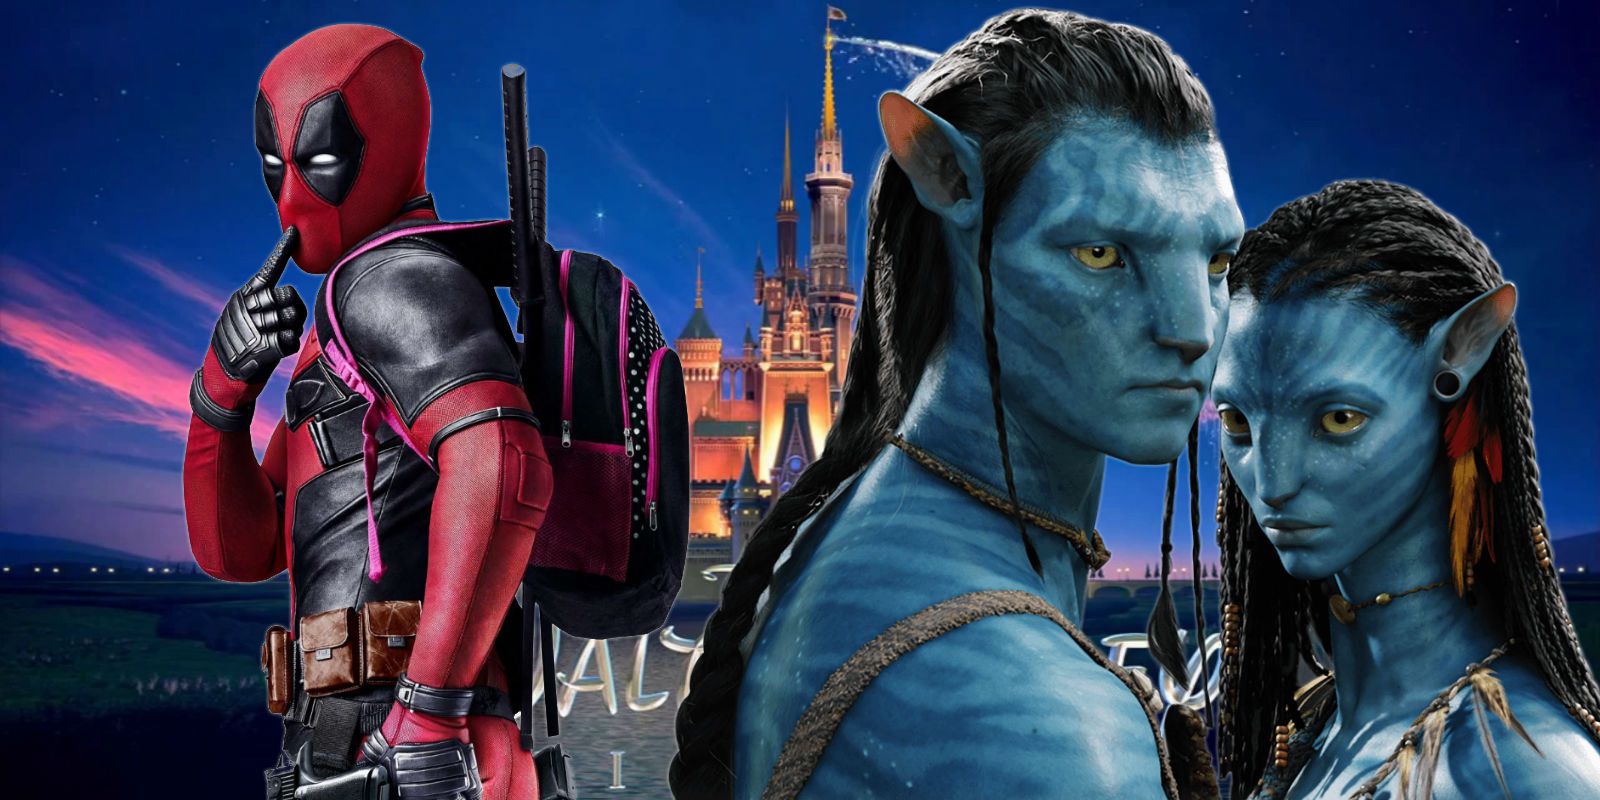 What Disney Will Do With Fox's Movies, Franchises & Studios